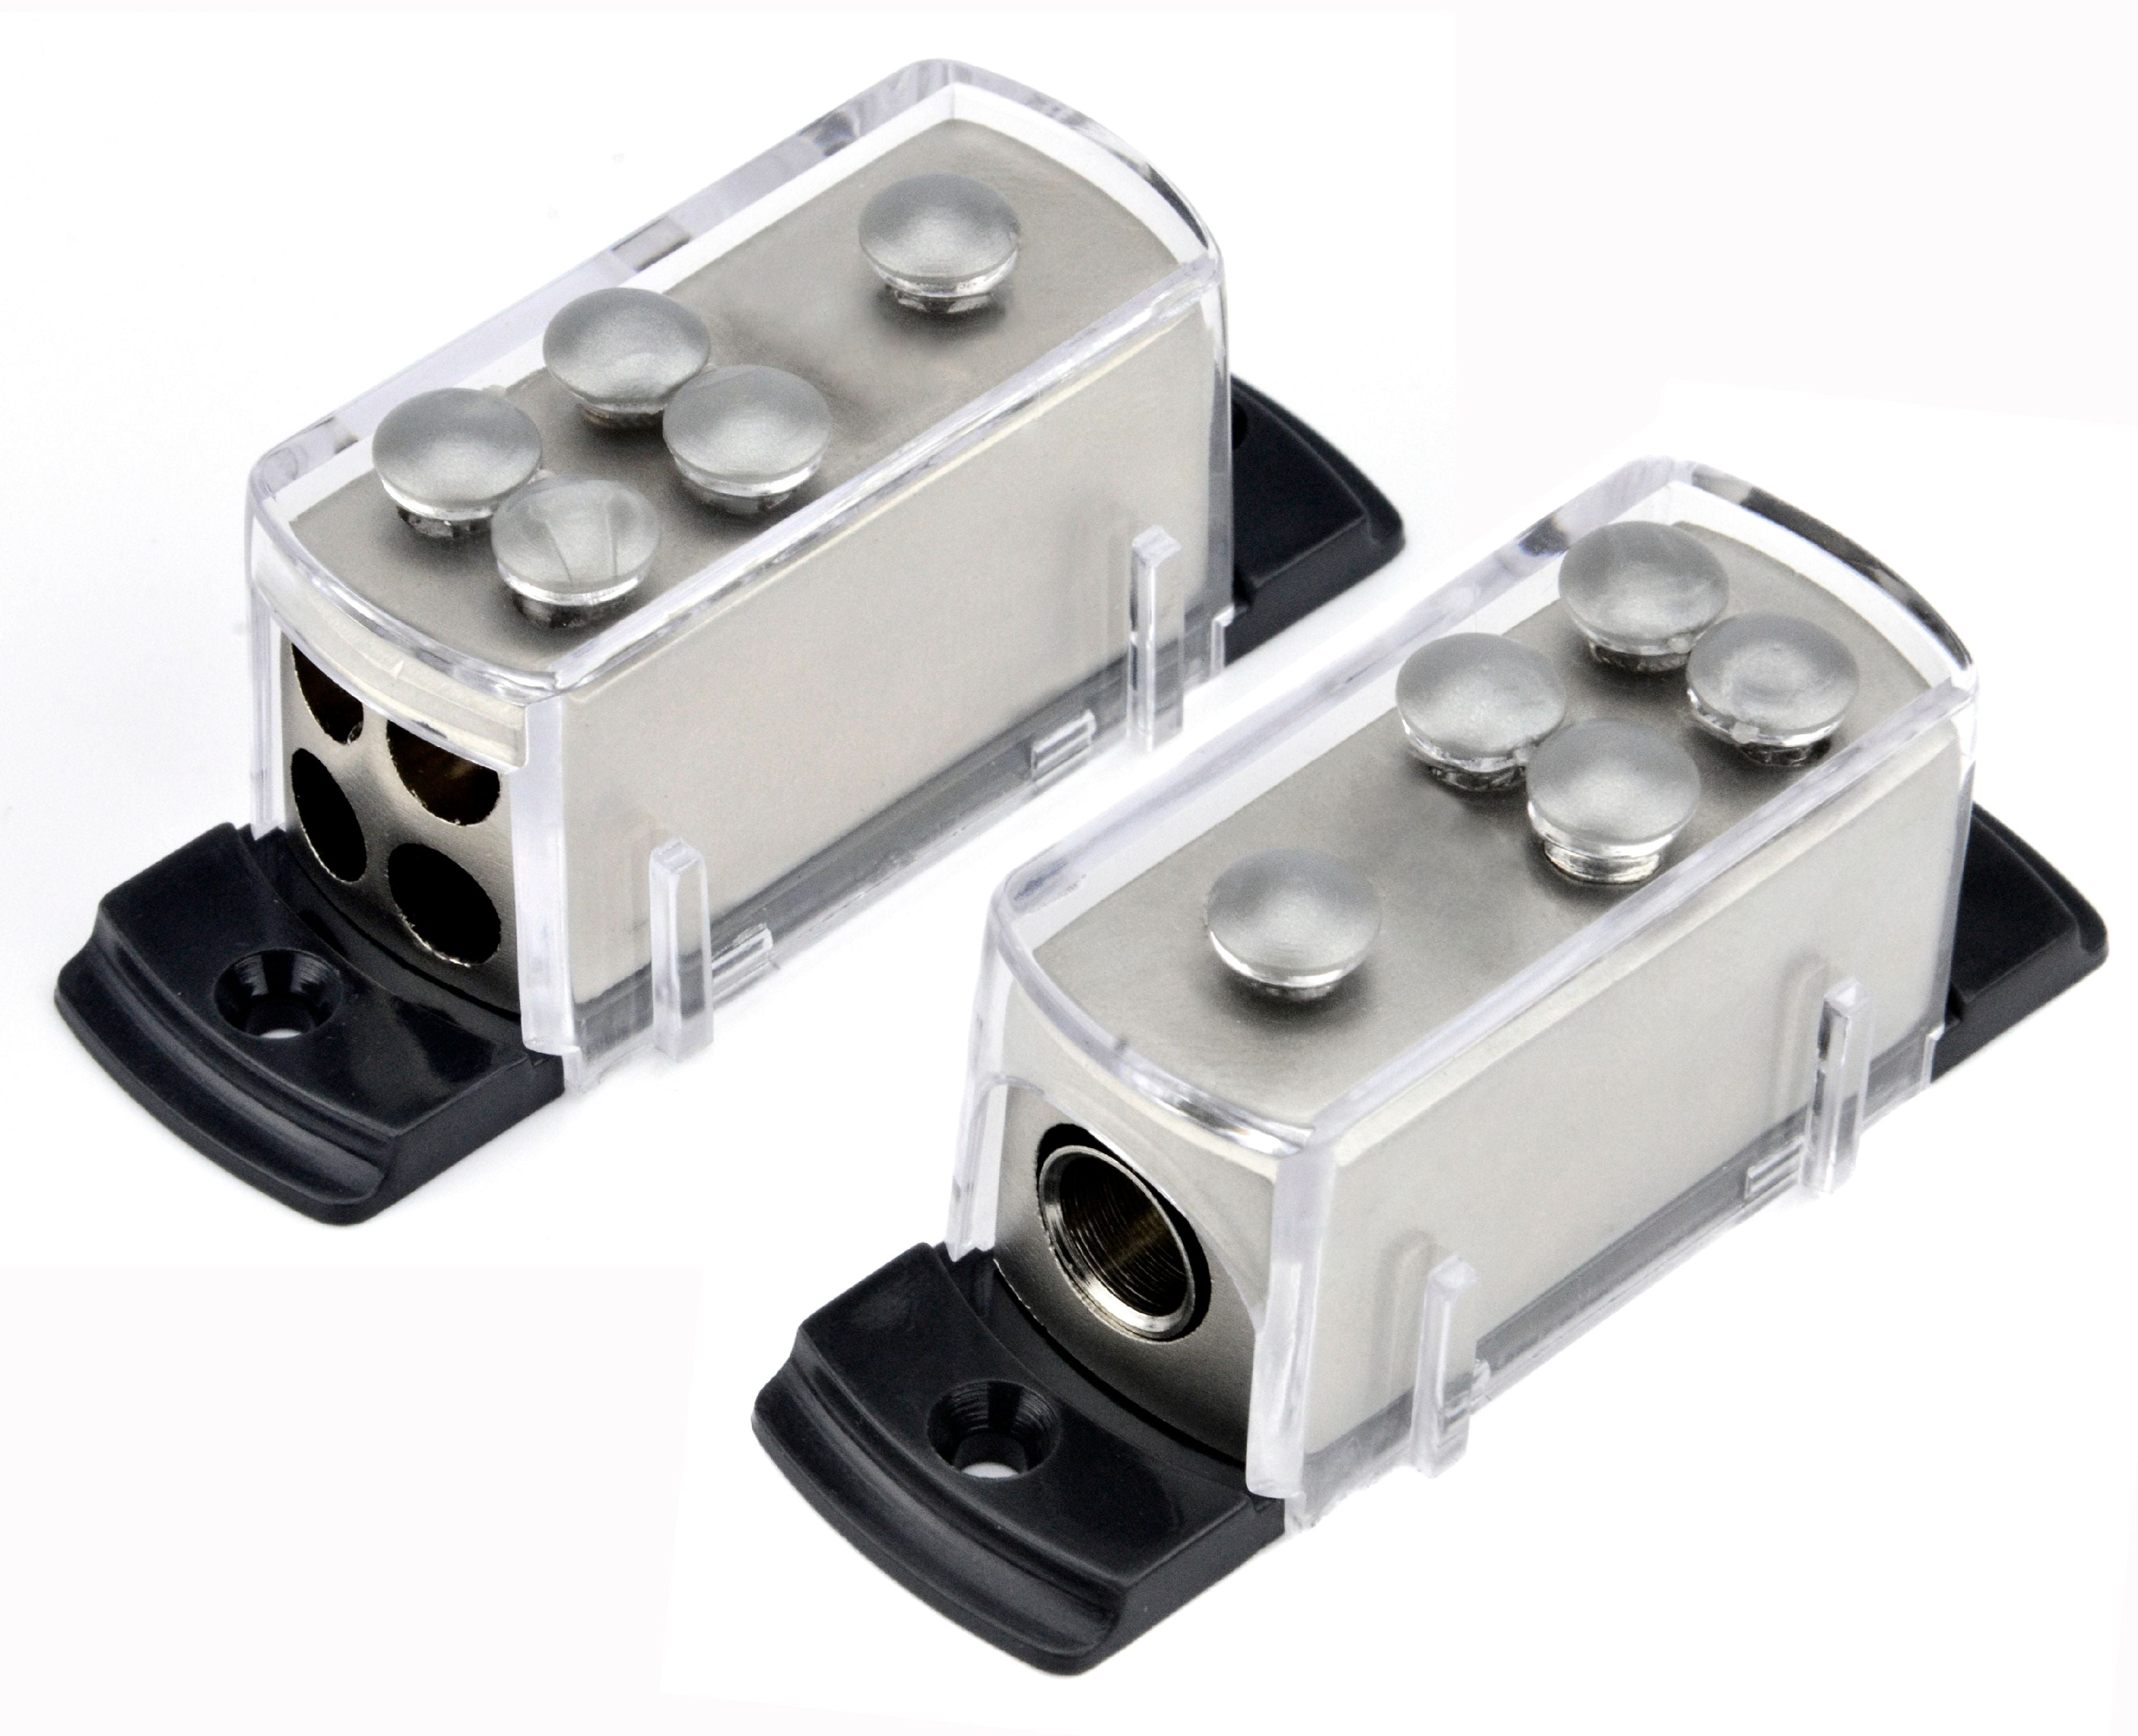 Samurai Any Gauge 3-Position Ground/Power Distribution Block for Car Audio Amplifiers